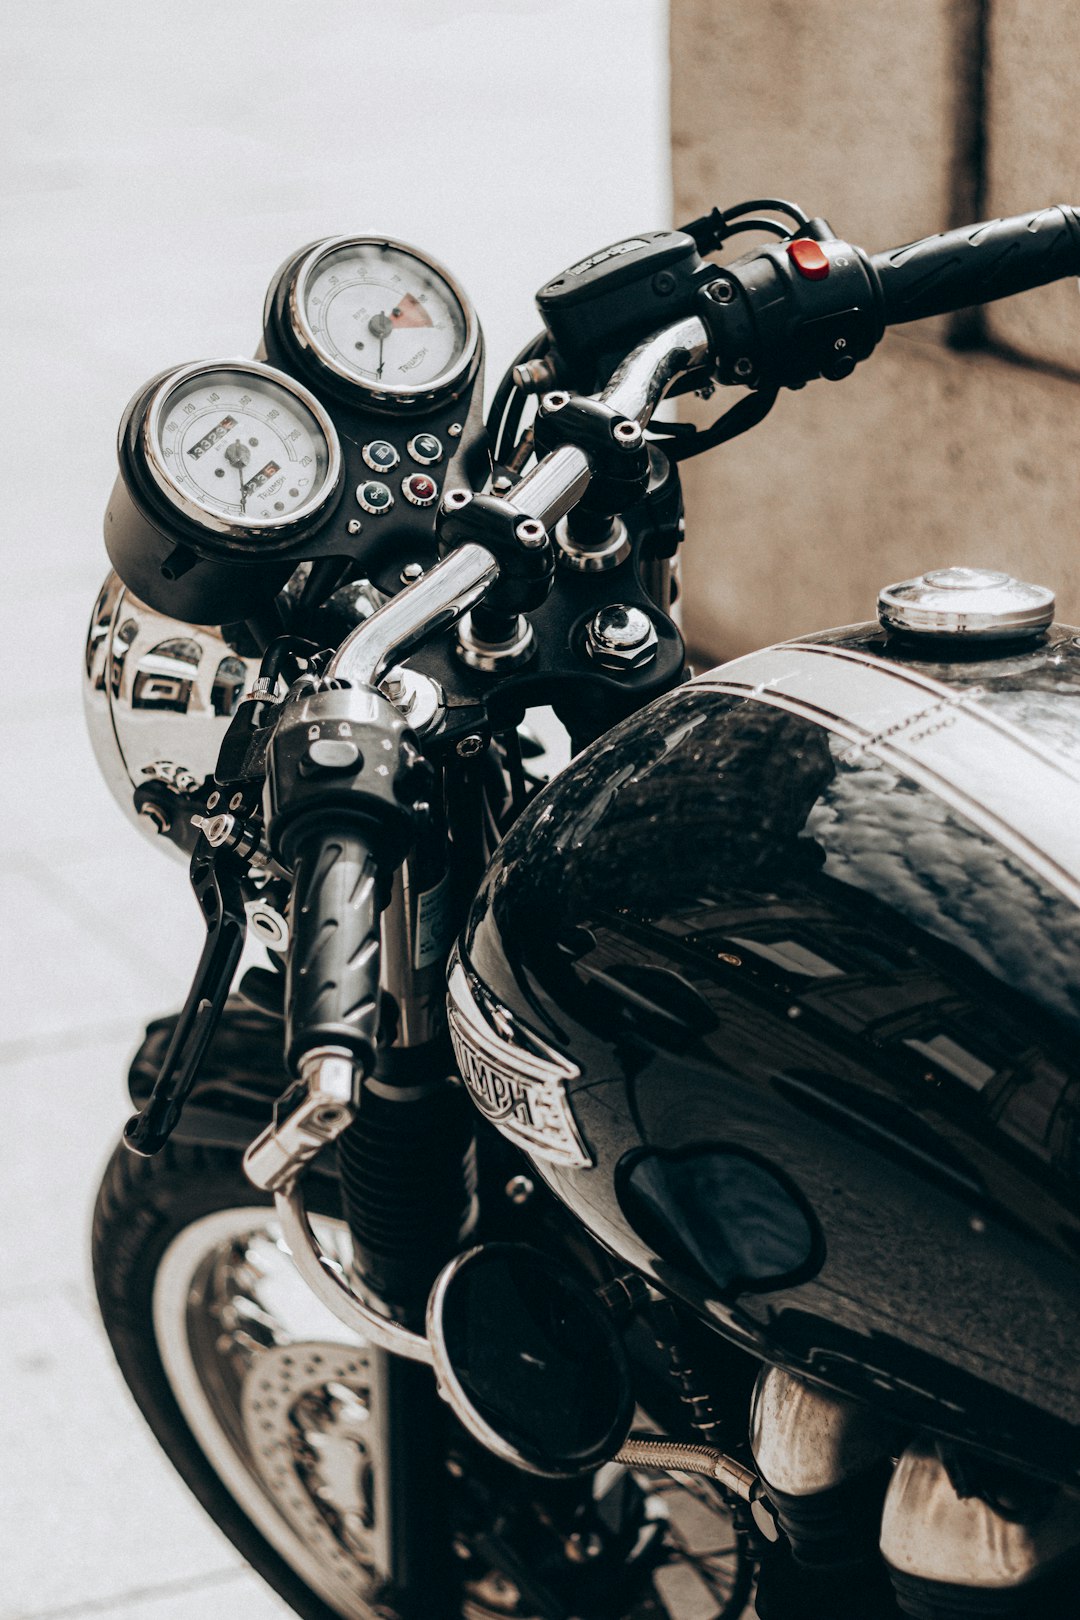 black and silver motorcycle with white and black gauge